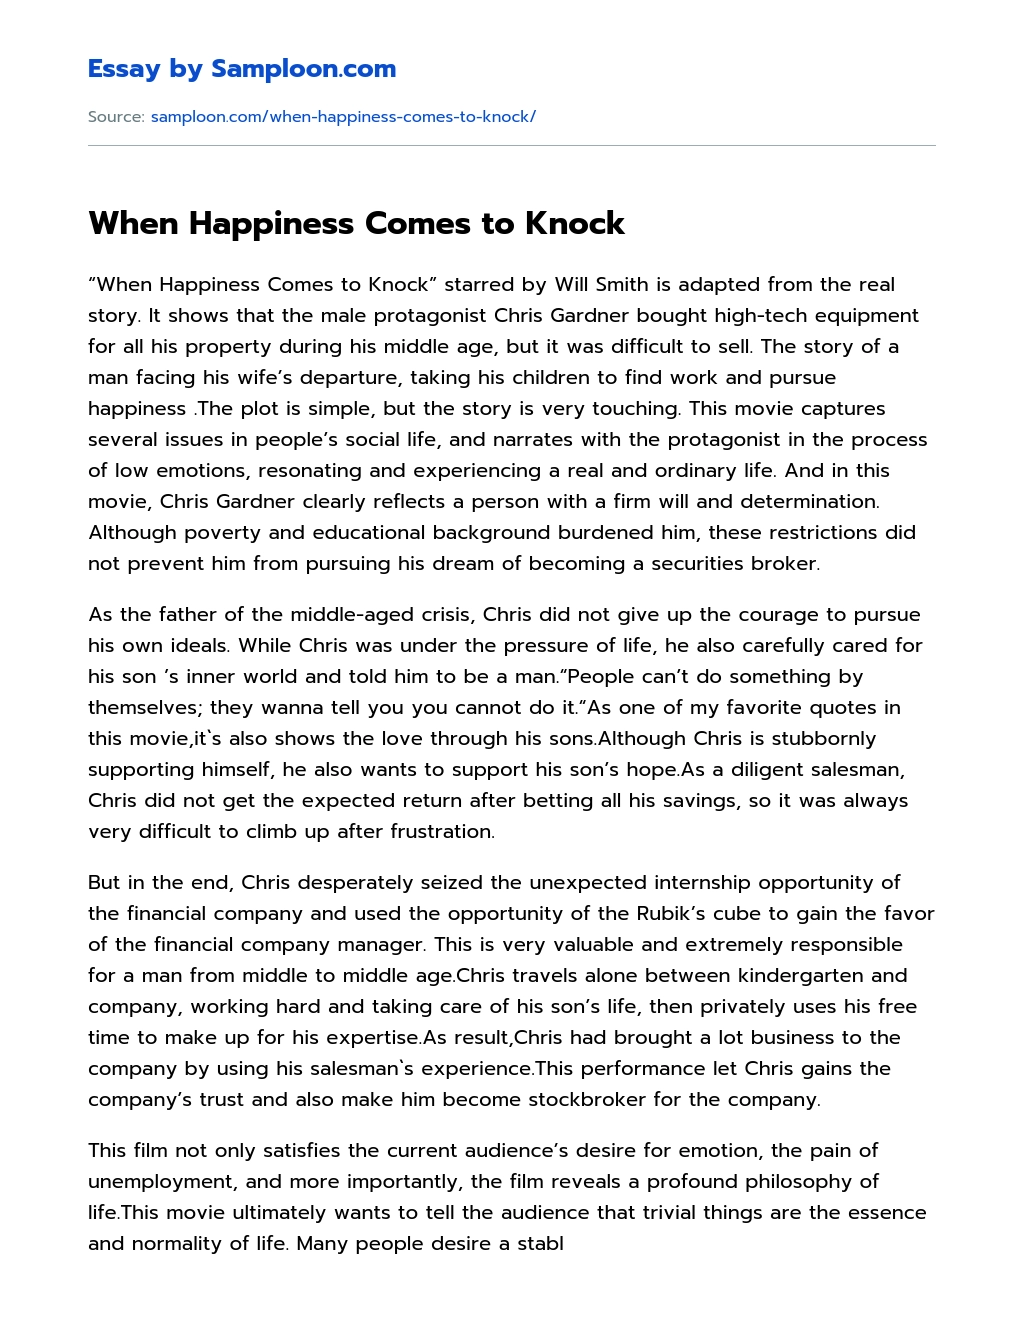 When Happiness Comes to Knock essay